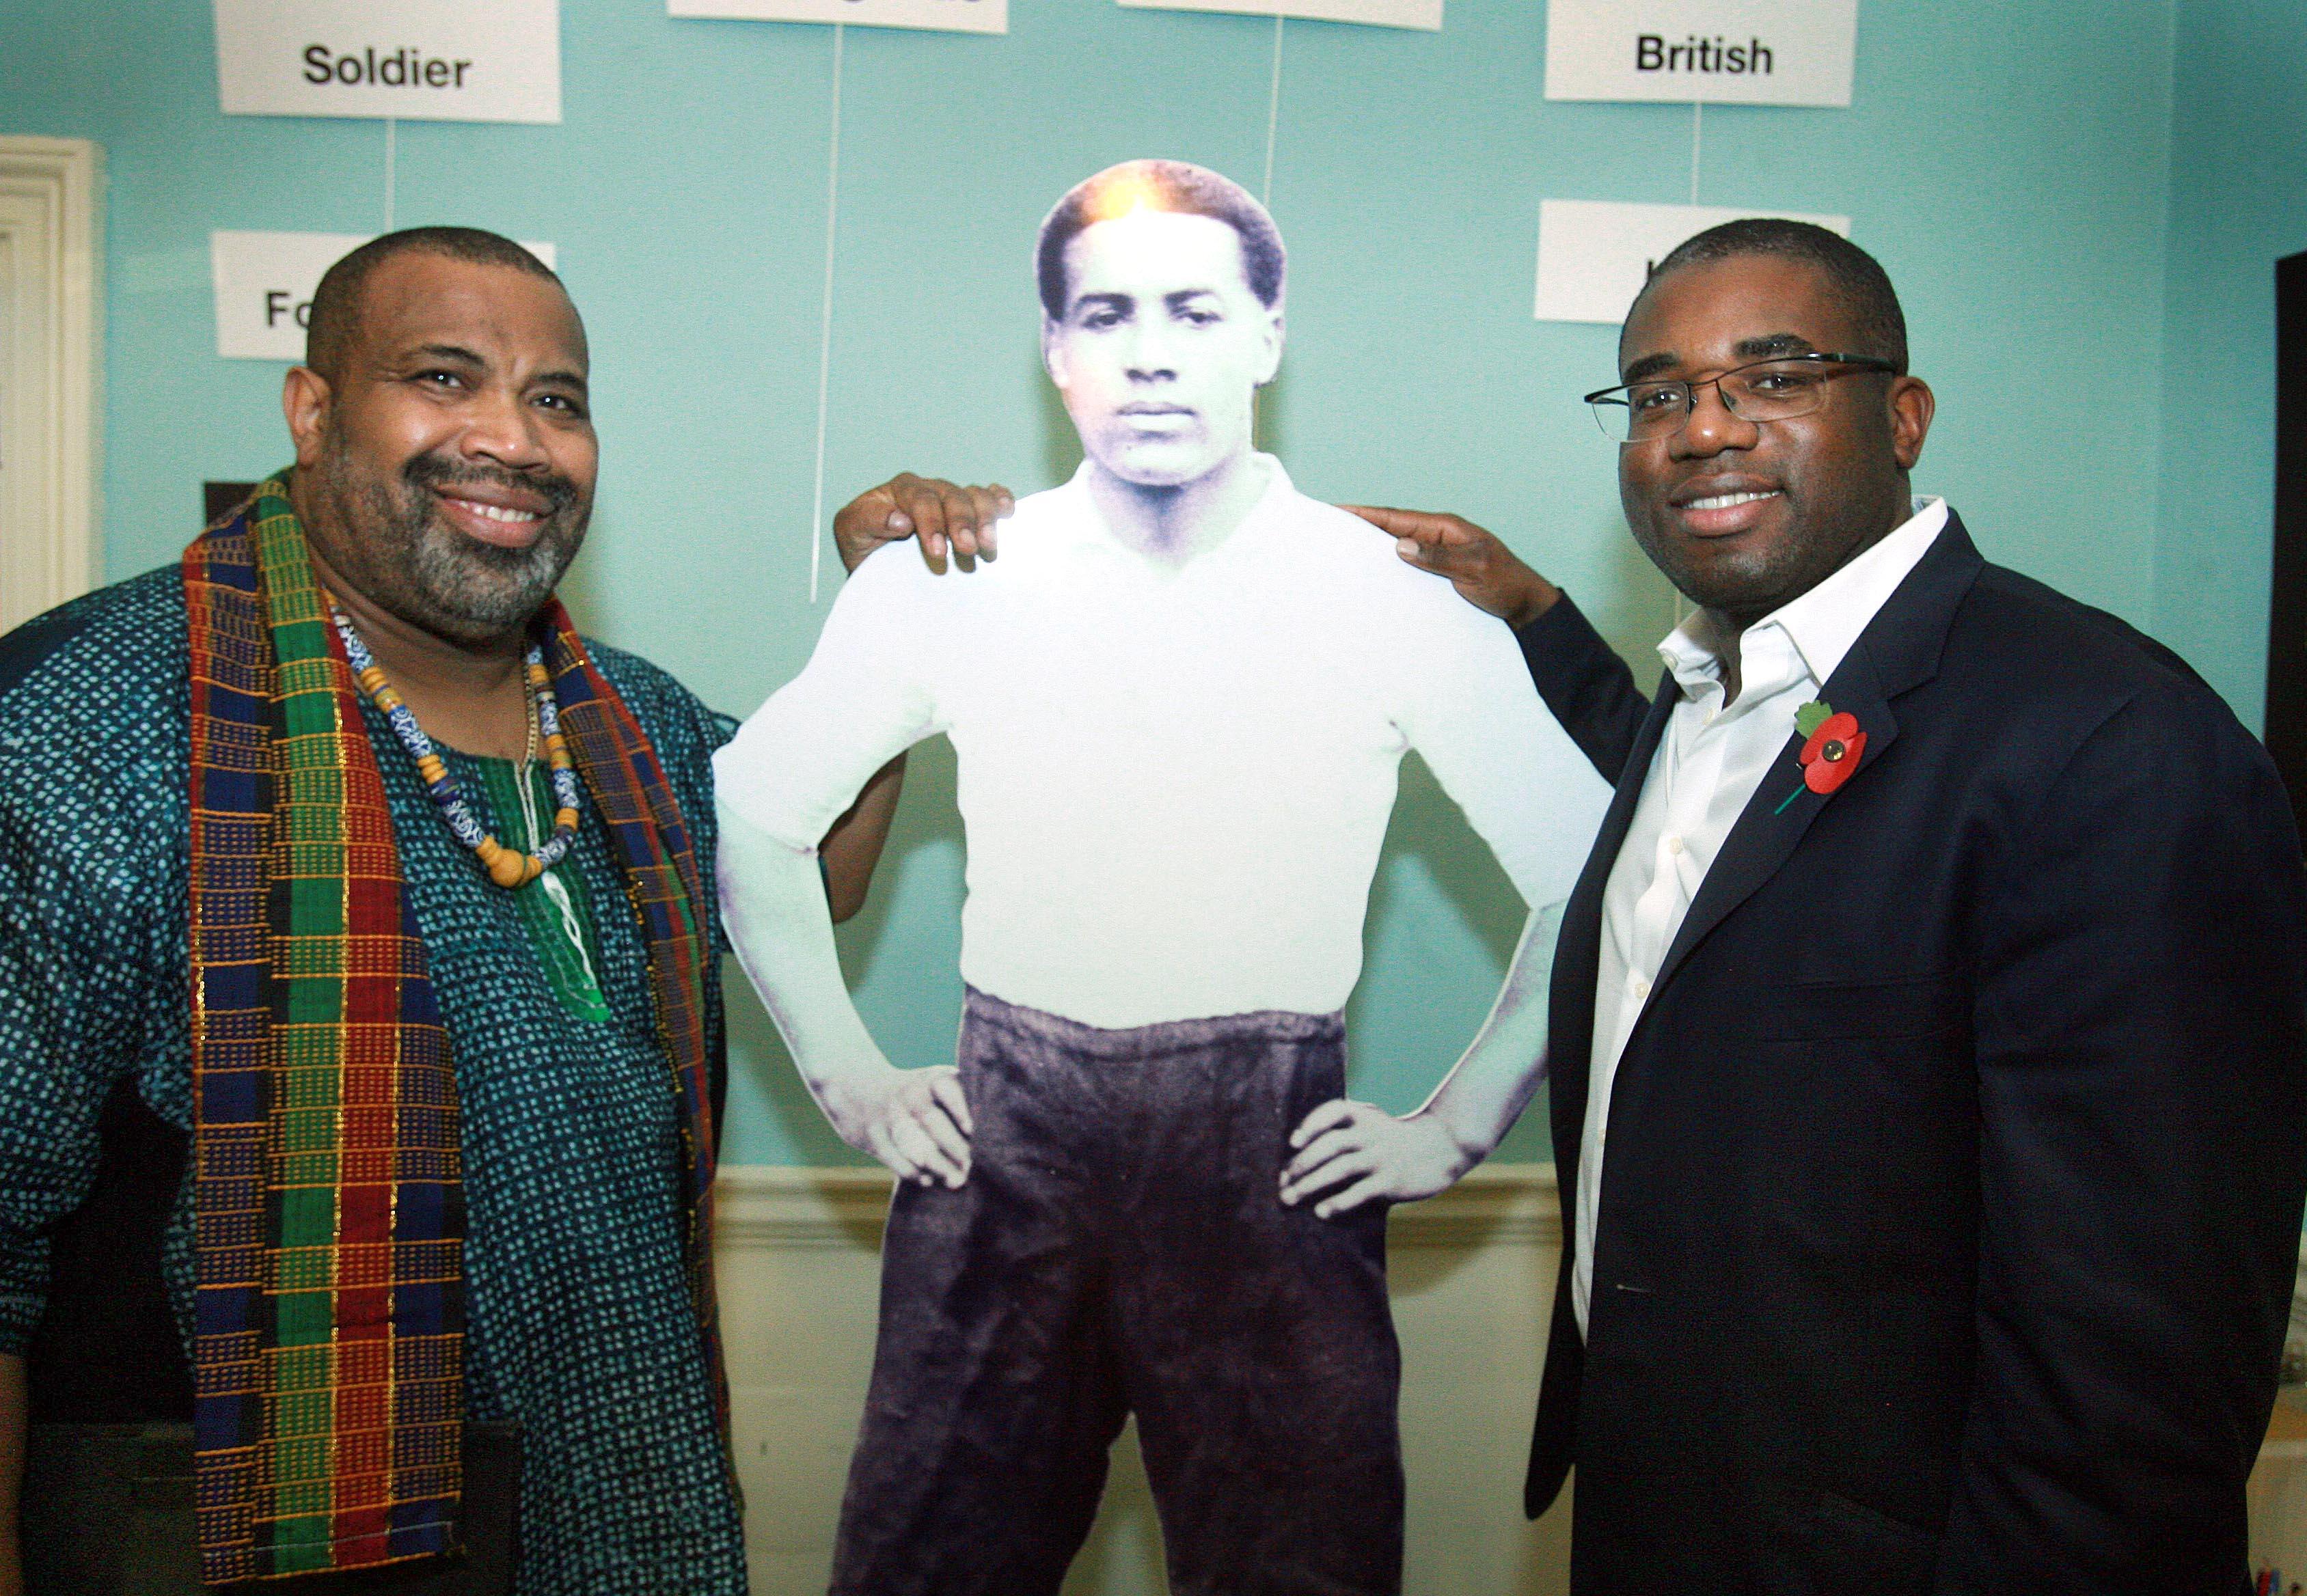 Walter Tull exhibition visited by David Lammy MP and Hesketh Benoit local community sports leader and activist